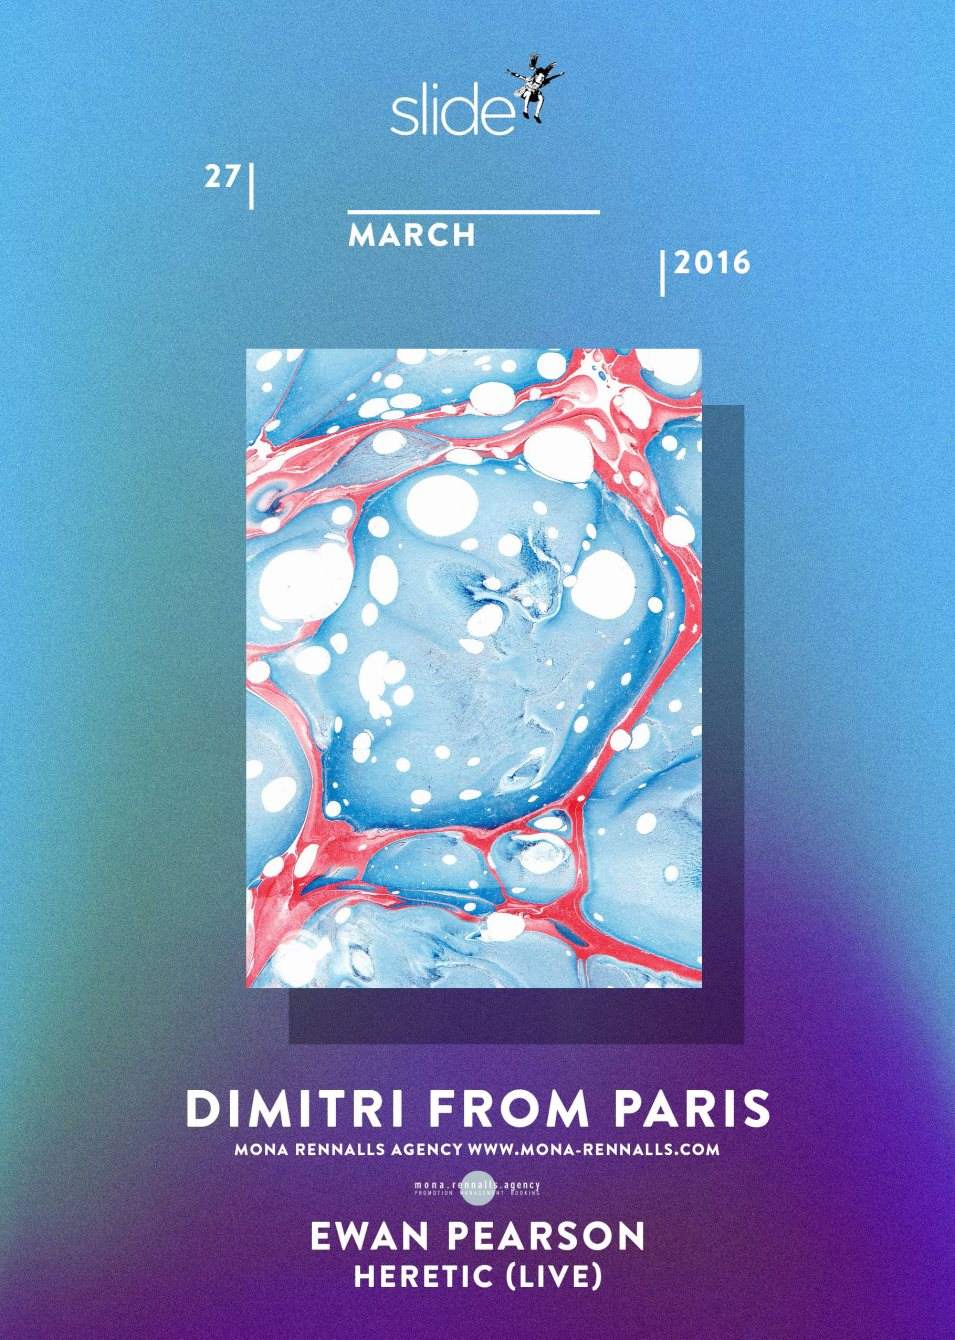 Slide Easter Sunday with Dimitri From Paris, Ewan Pearson & Heretic (Live) - フライヤー表